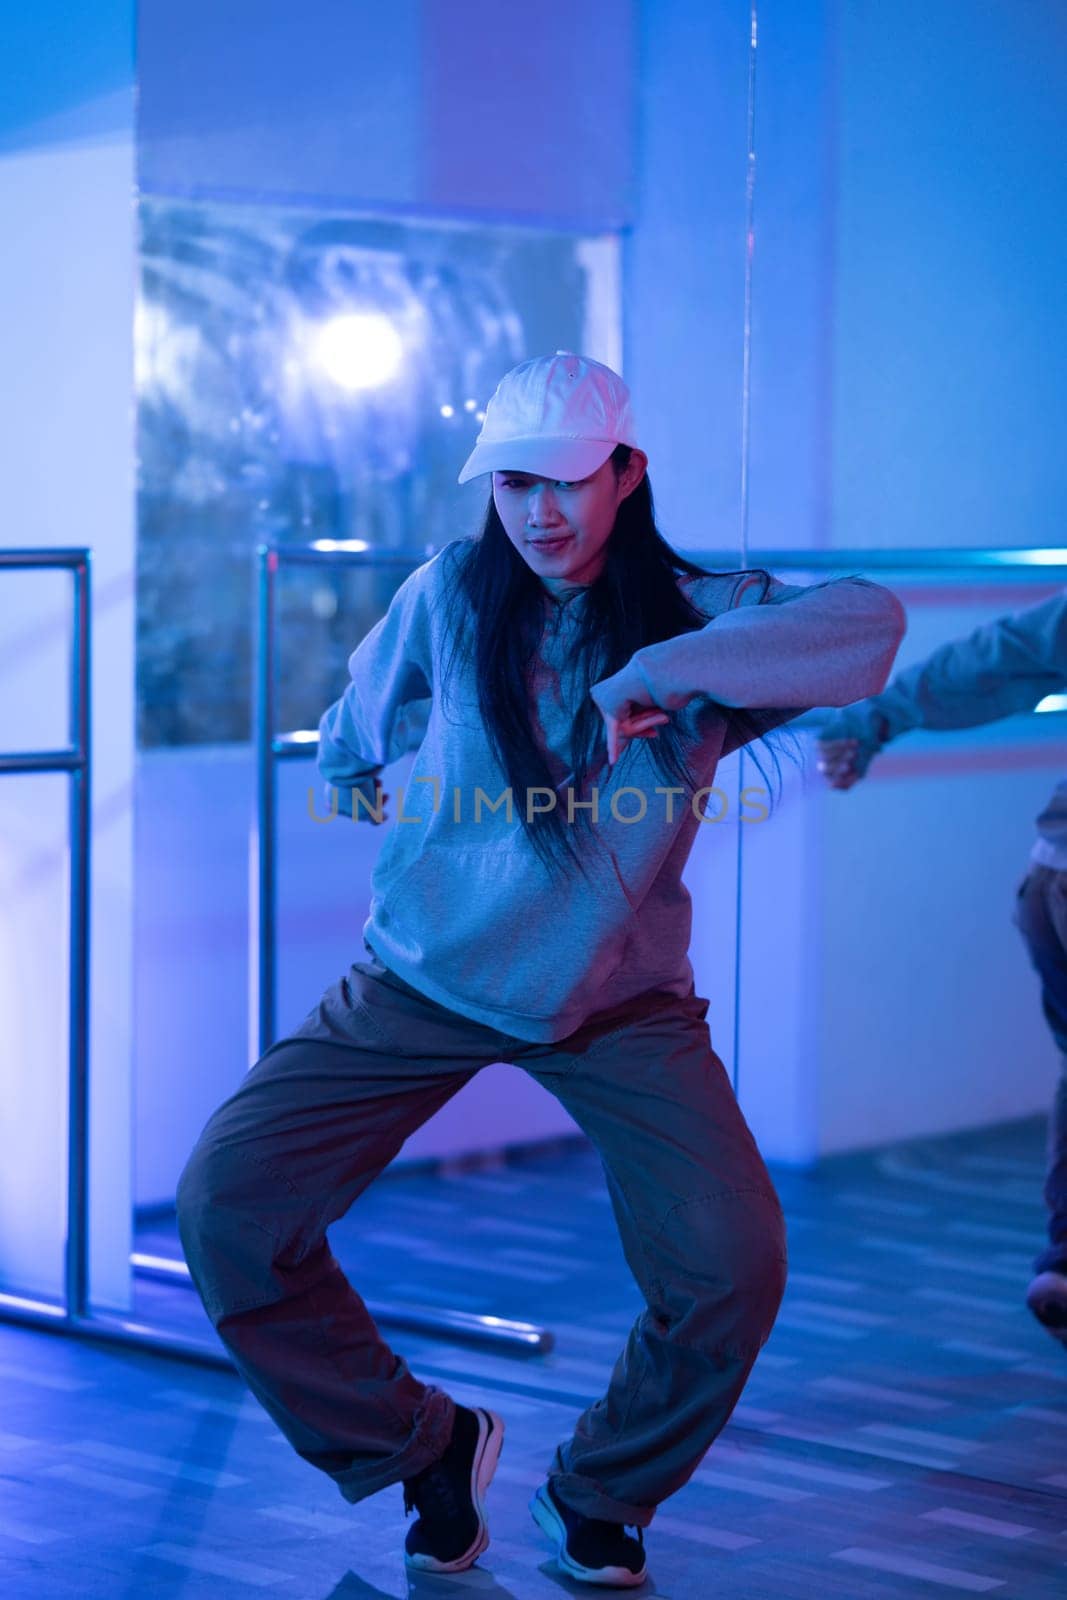 Young Asian woman practicing modern dance styles in a studio with neon light.